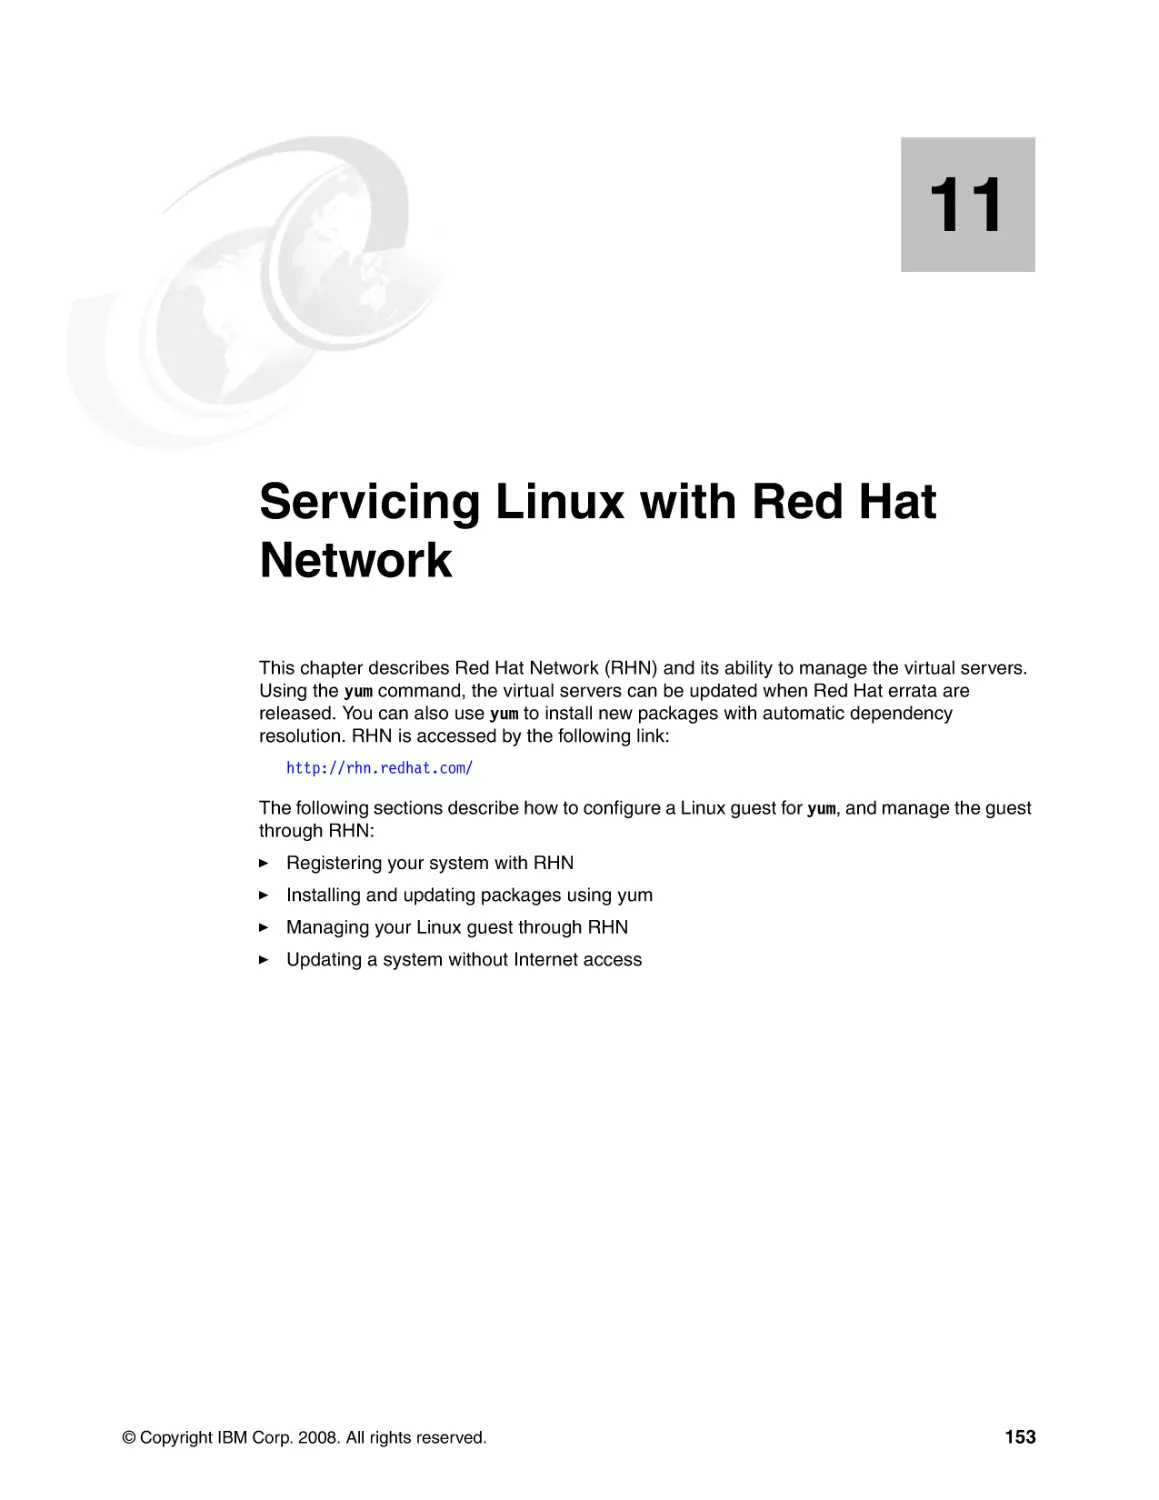 Chapter 11. Servicing Linux with Red Hat Network